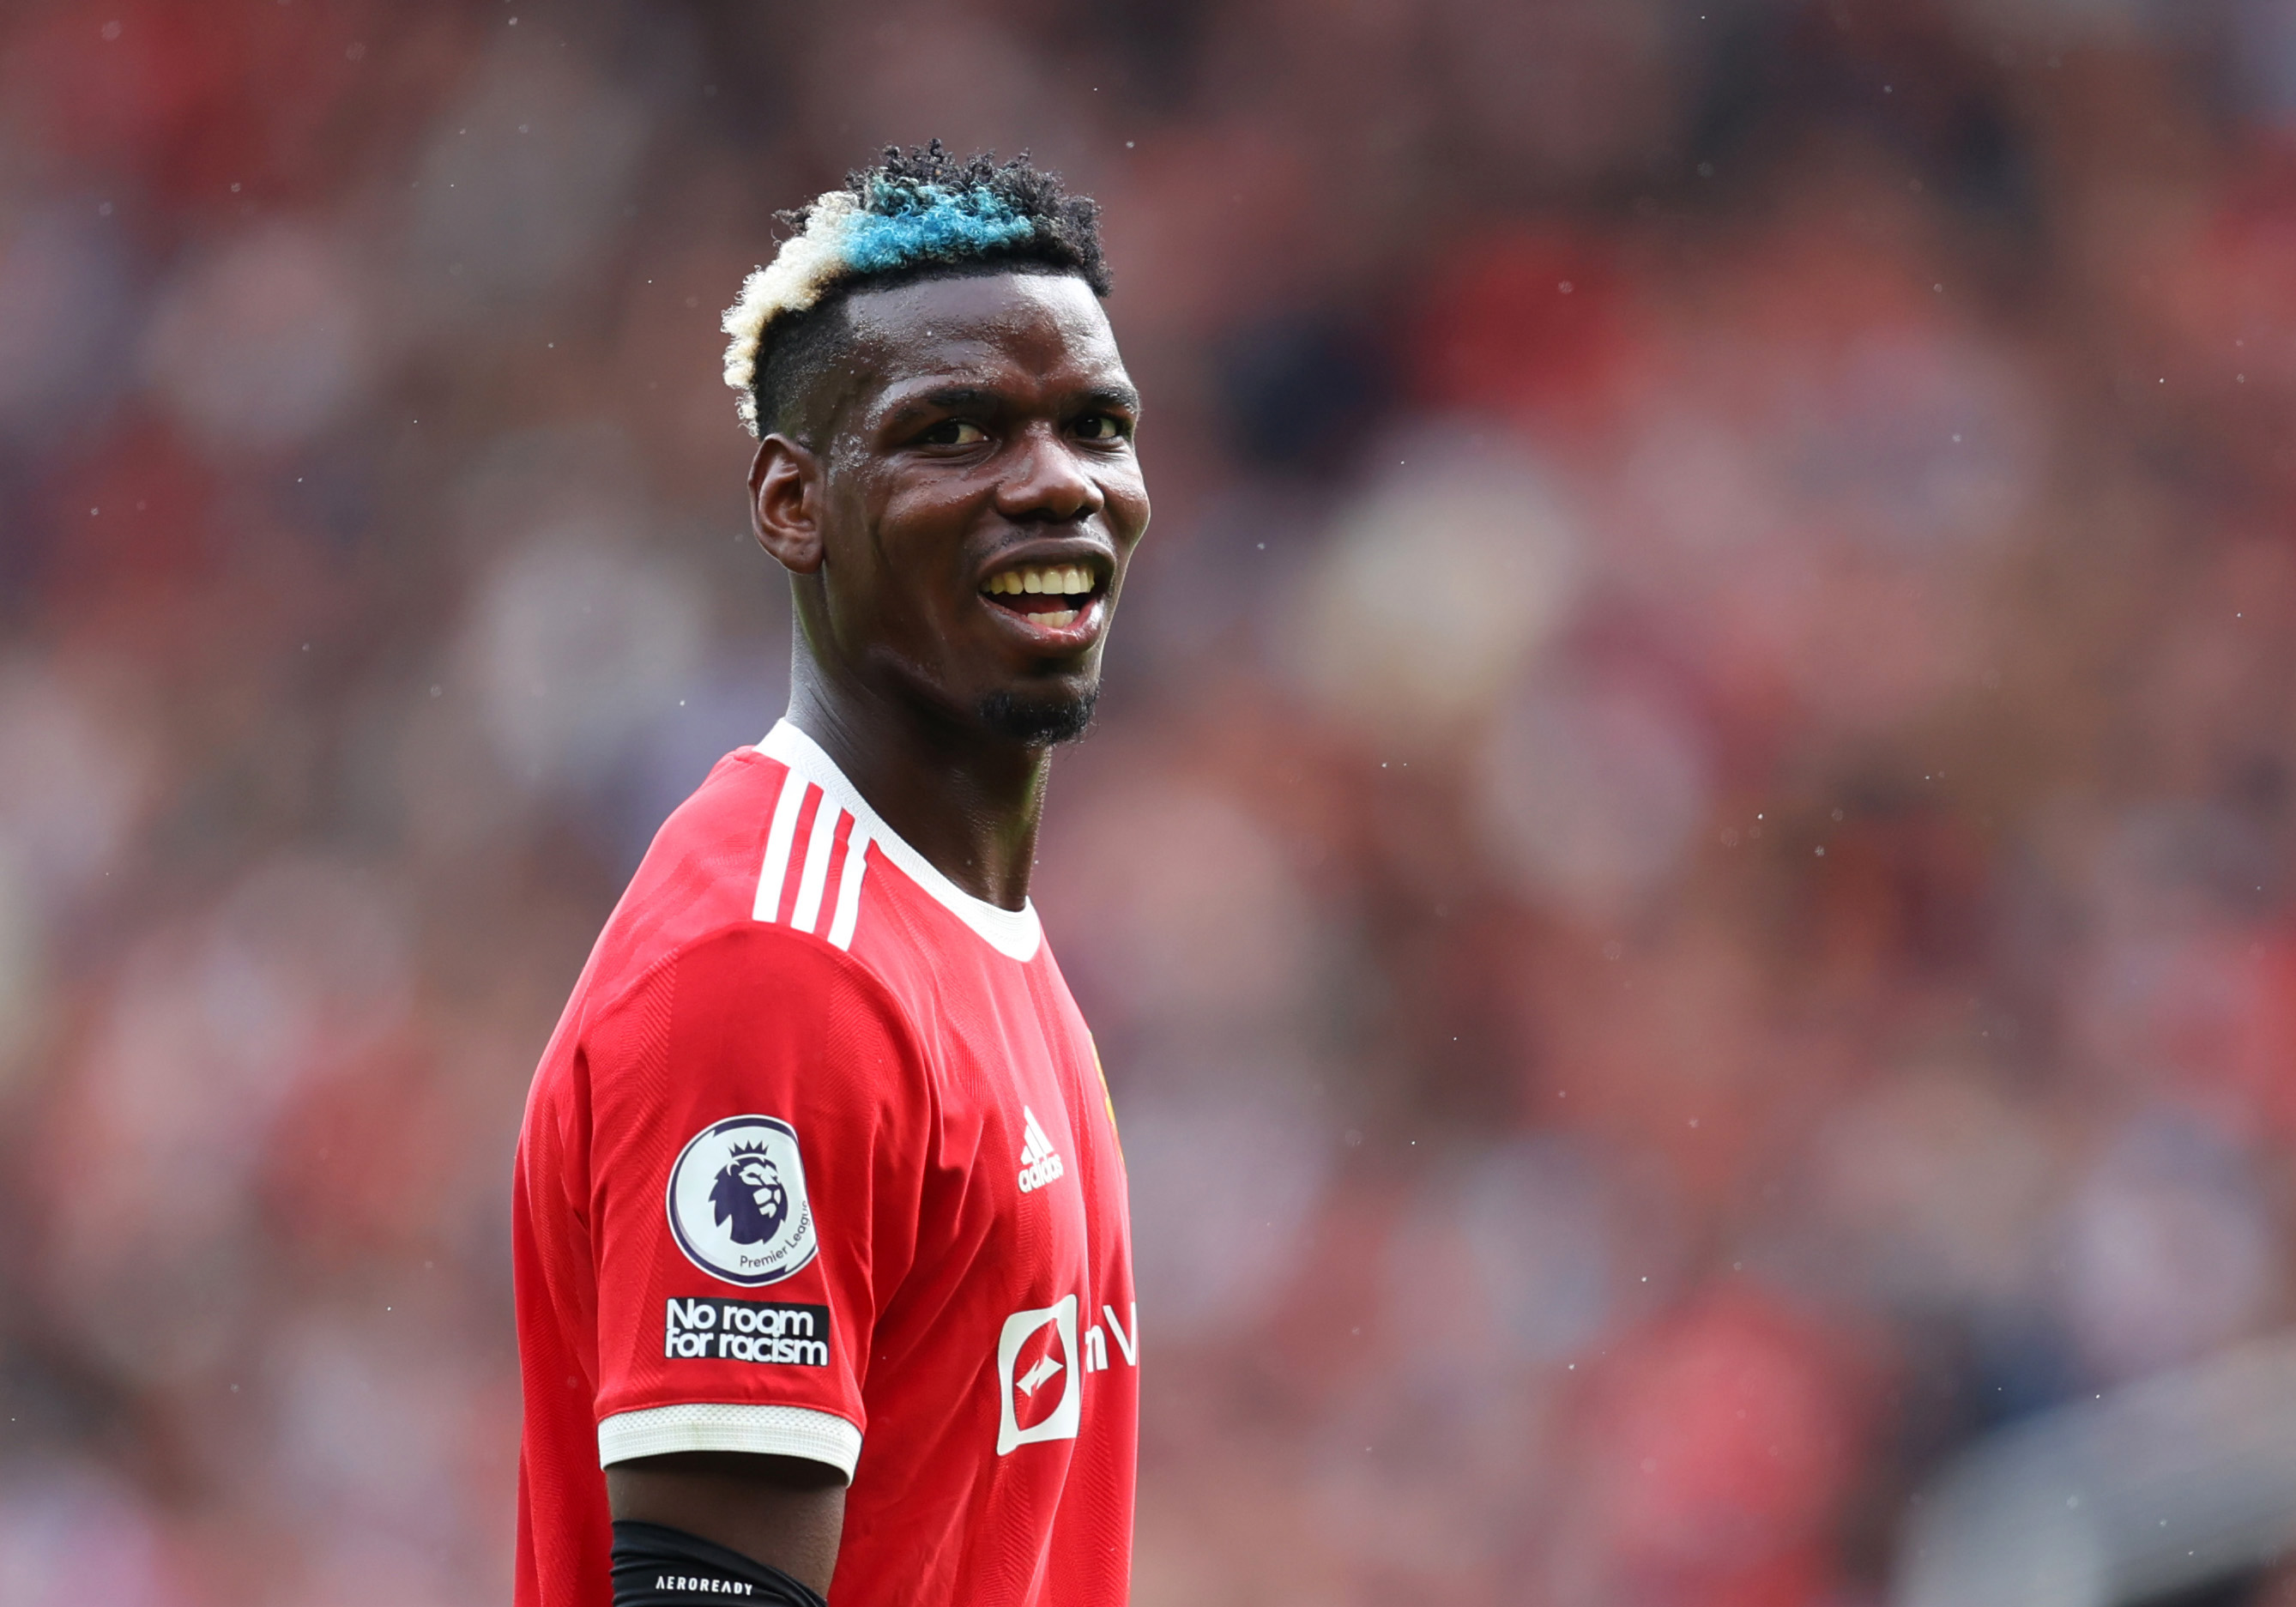 Thought process is to show Manchester United that they made mistake, proclaims Paul Pogba